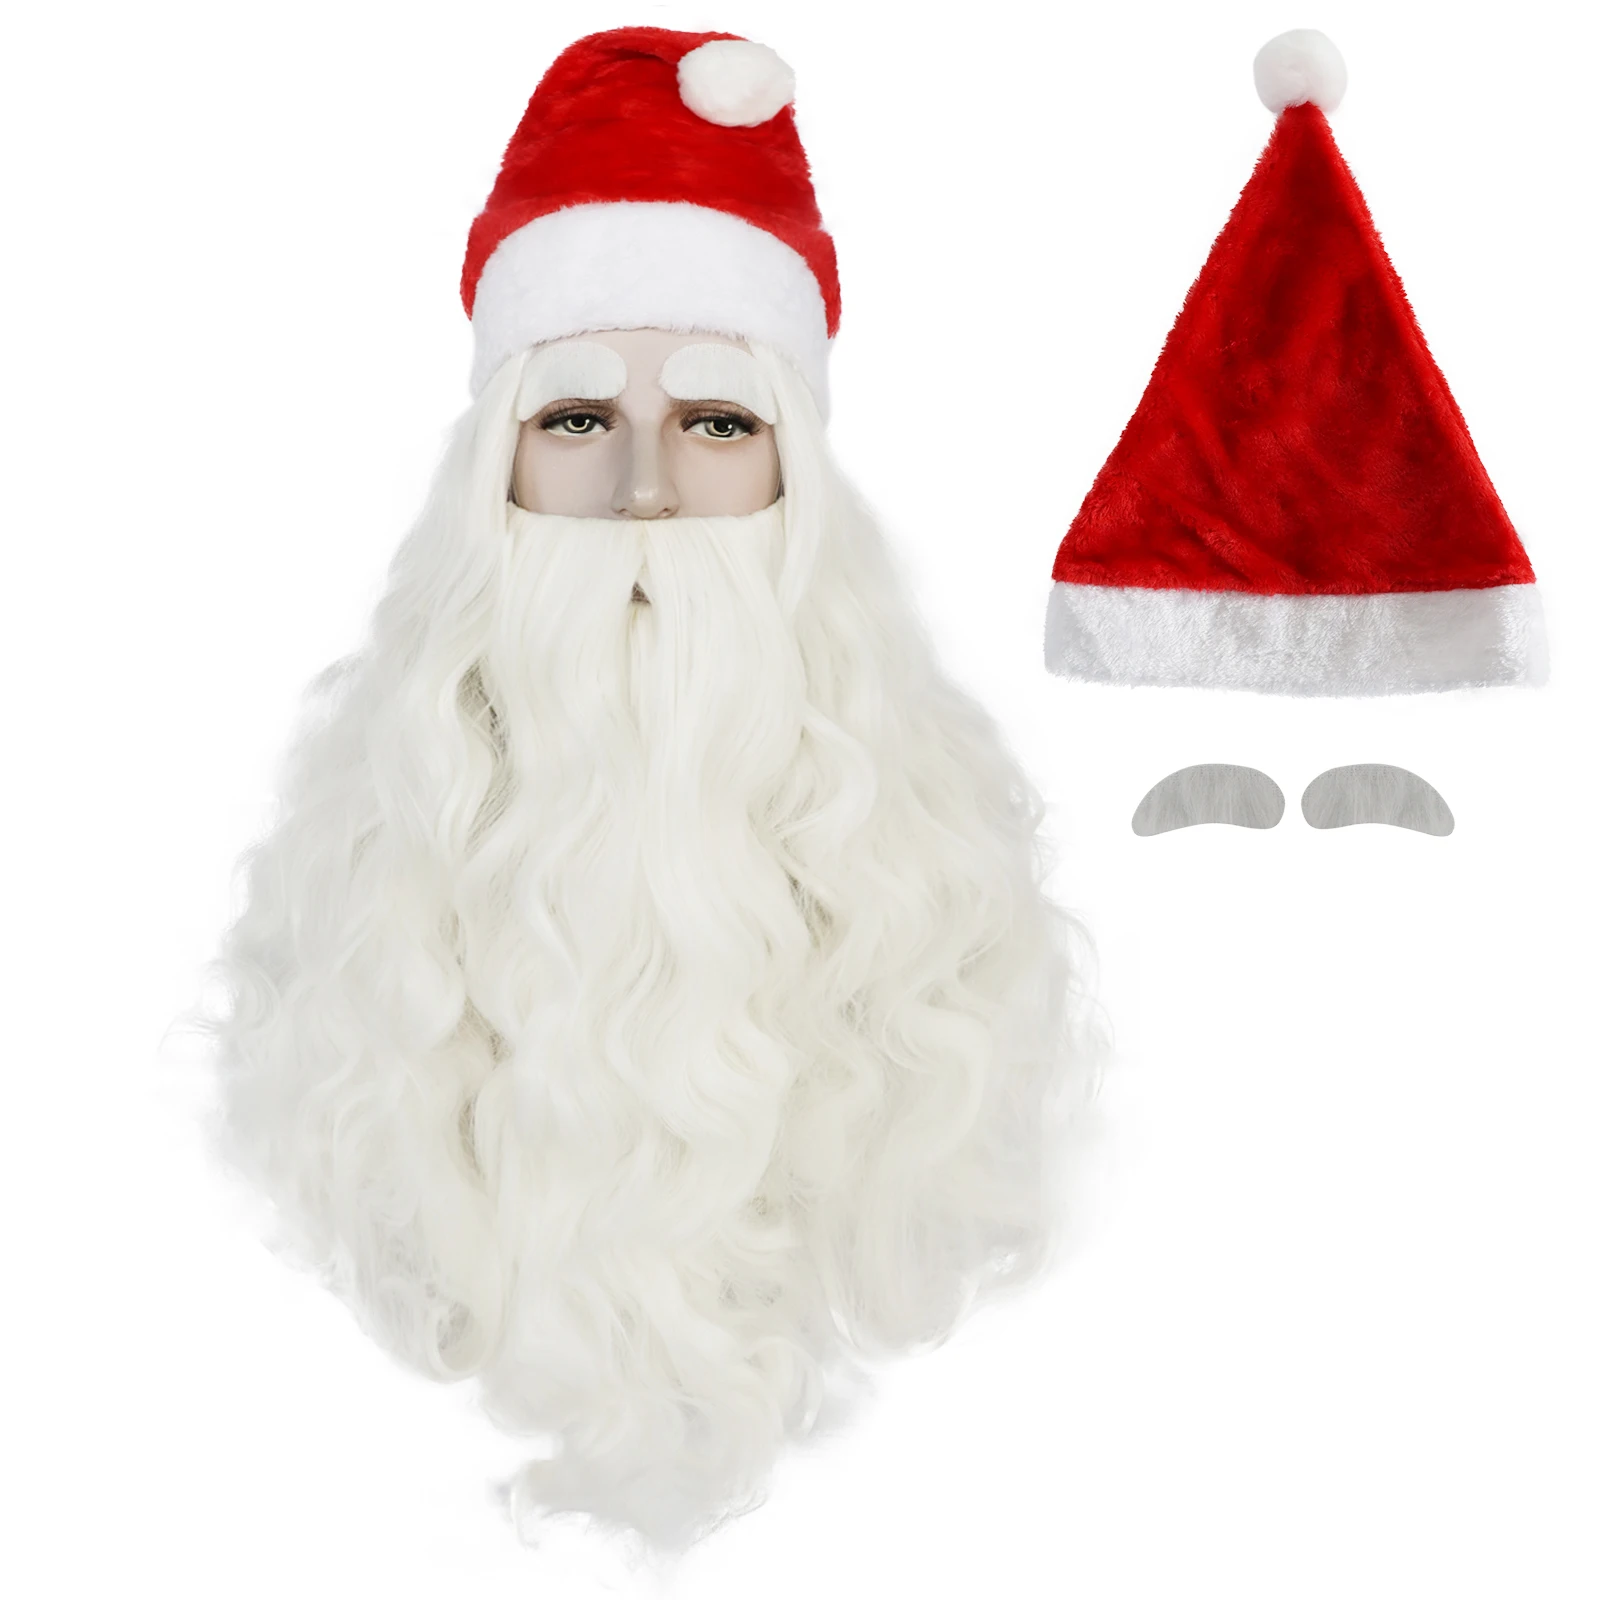 Anogol Synthetic Santa Claus Cosplay Wig with Eyebrow and Christmas Hat White Long Curly Hair Old Man Father Christmas Wigs